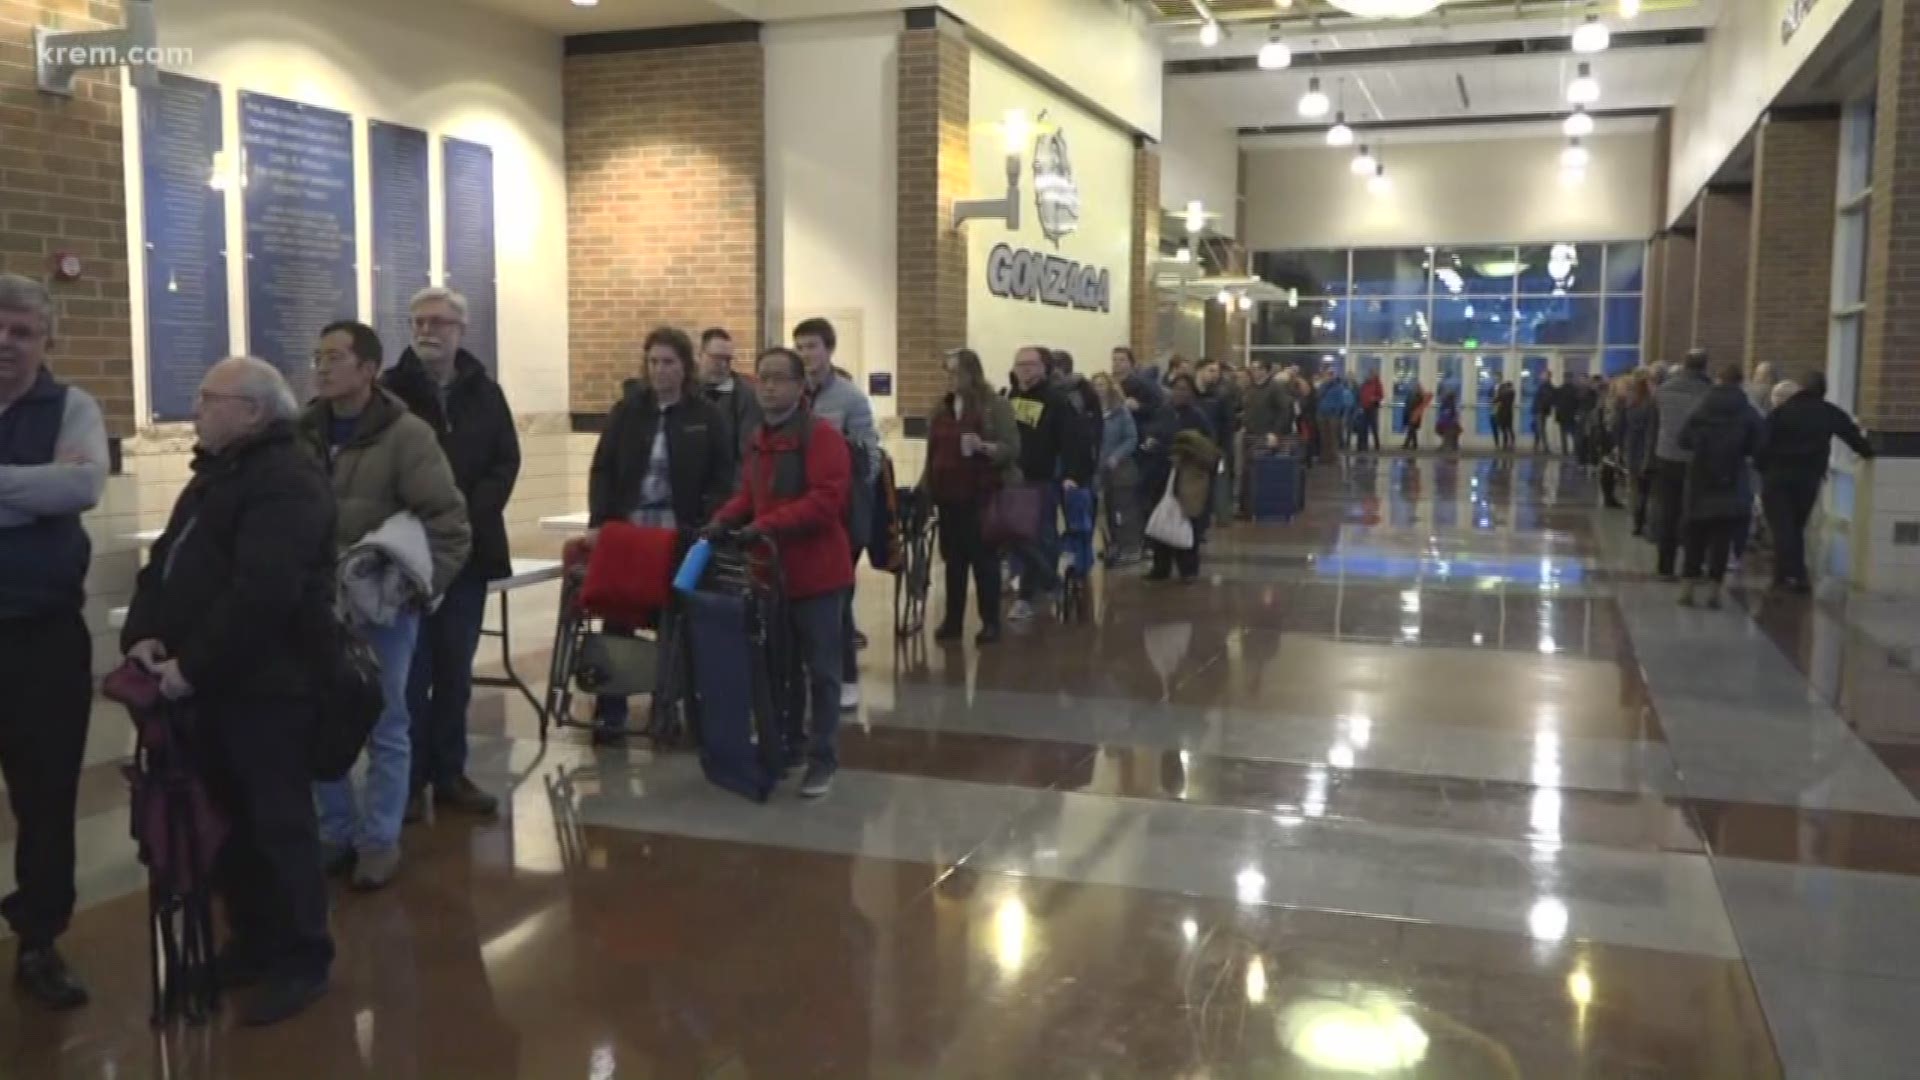 The game is set for Dec. 18 at 6 p.m., when students are already on Christmas vacation. At least 150 faculty and staff waited in McCarthey for tickets.